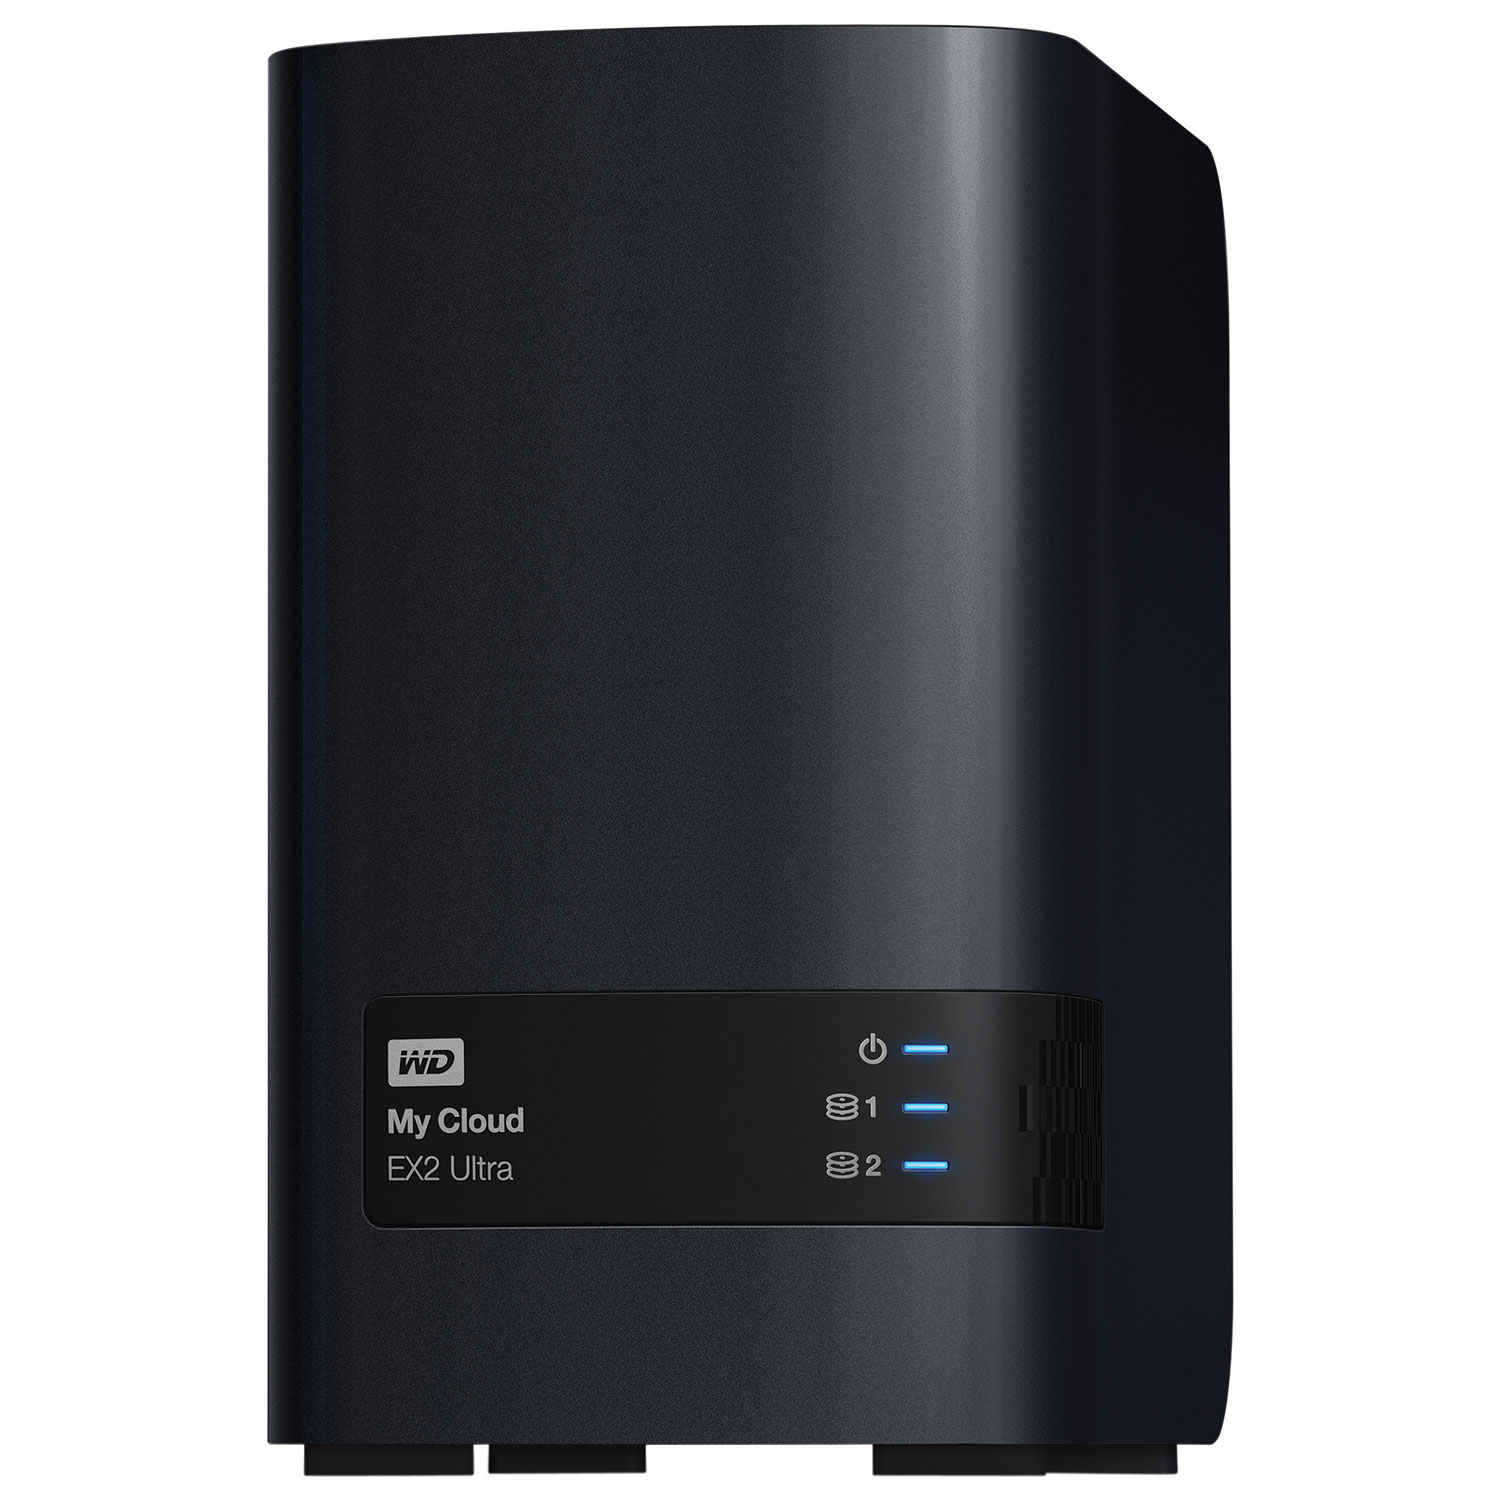 WD My Cloud EX2 Ultra Diskless Network Attached Storage (WDBVBZ0000NCH-NESN)